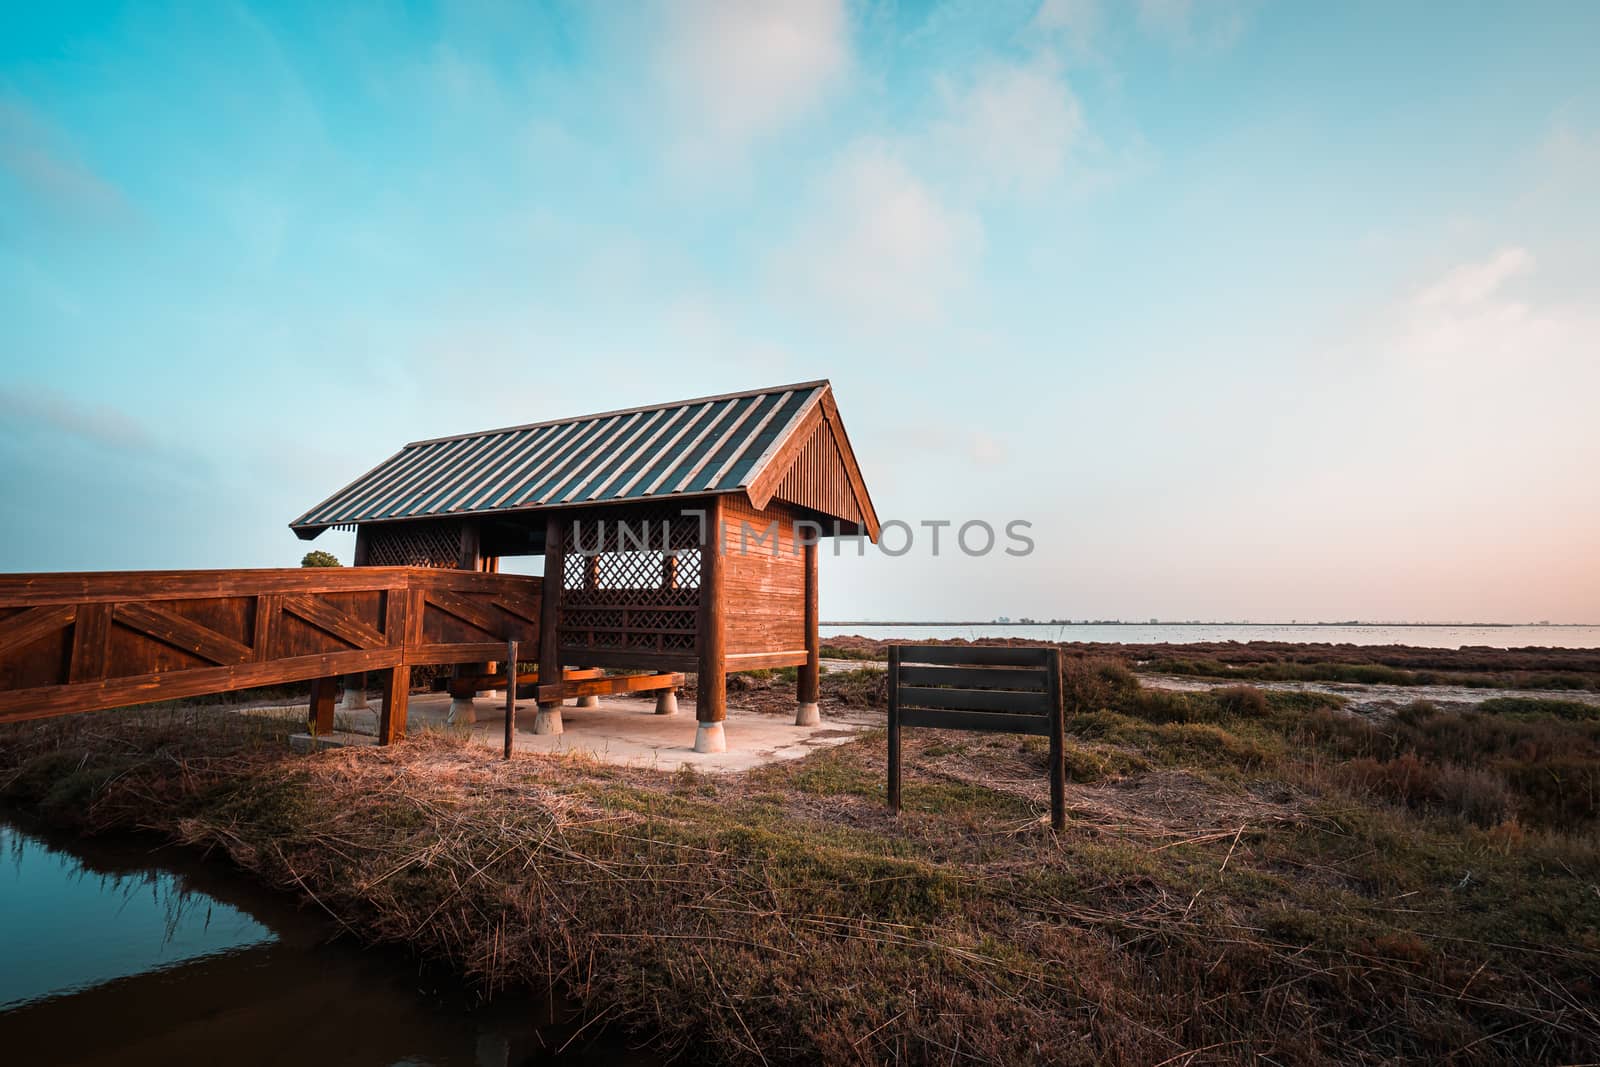 Wooden cabin or bird hut for bird watching in the Ebro river delta, Spain. Teal and orange style.